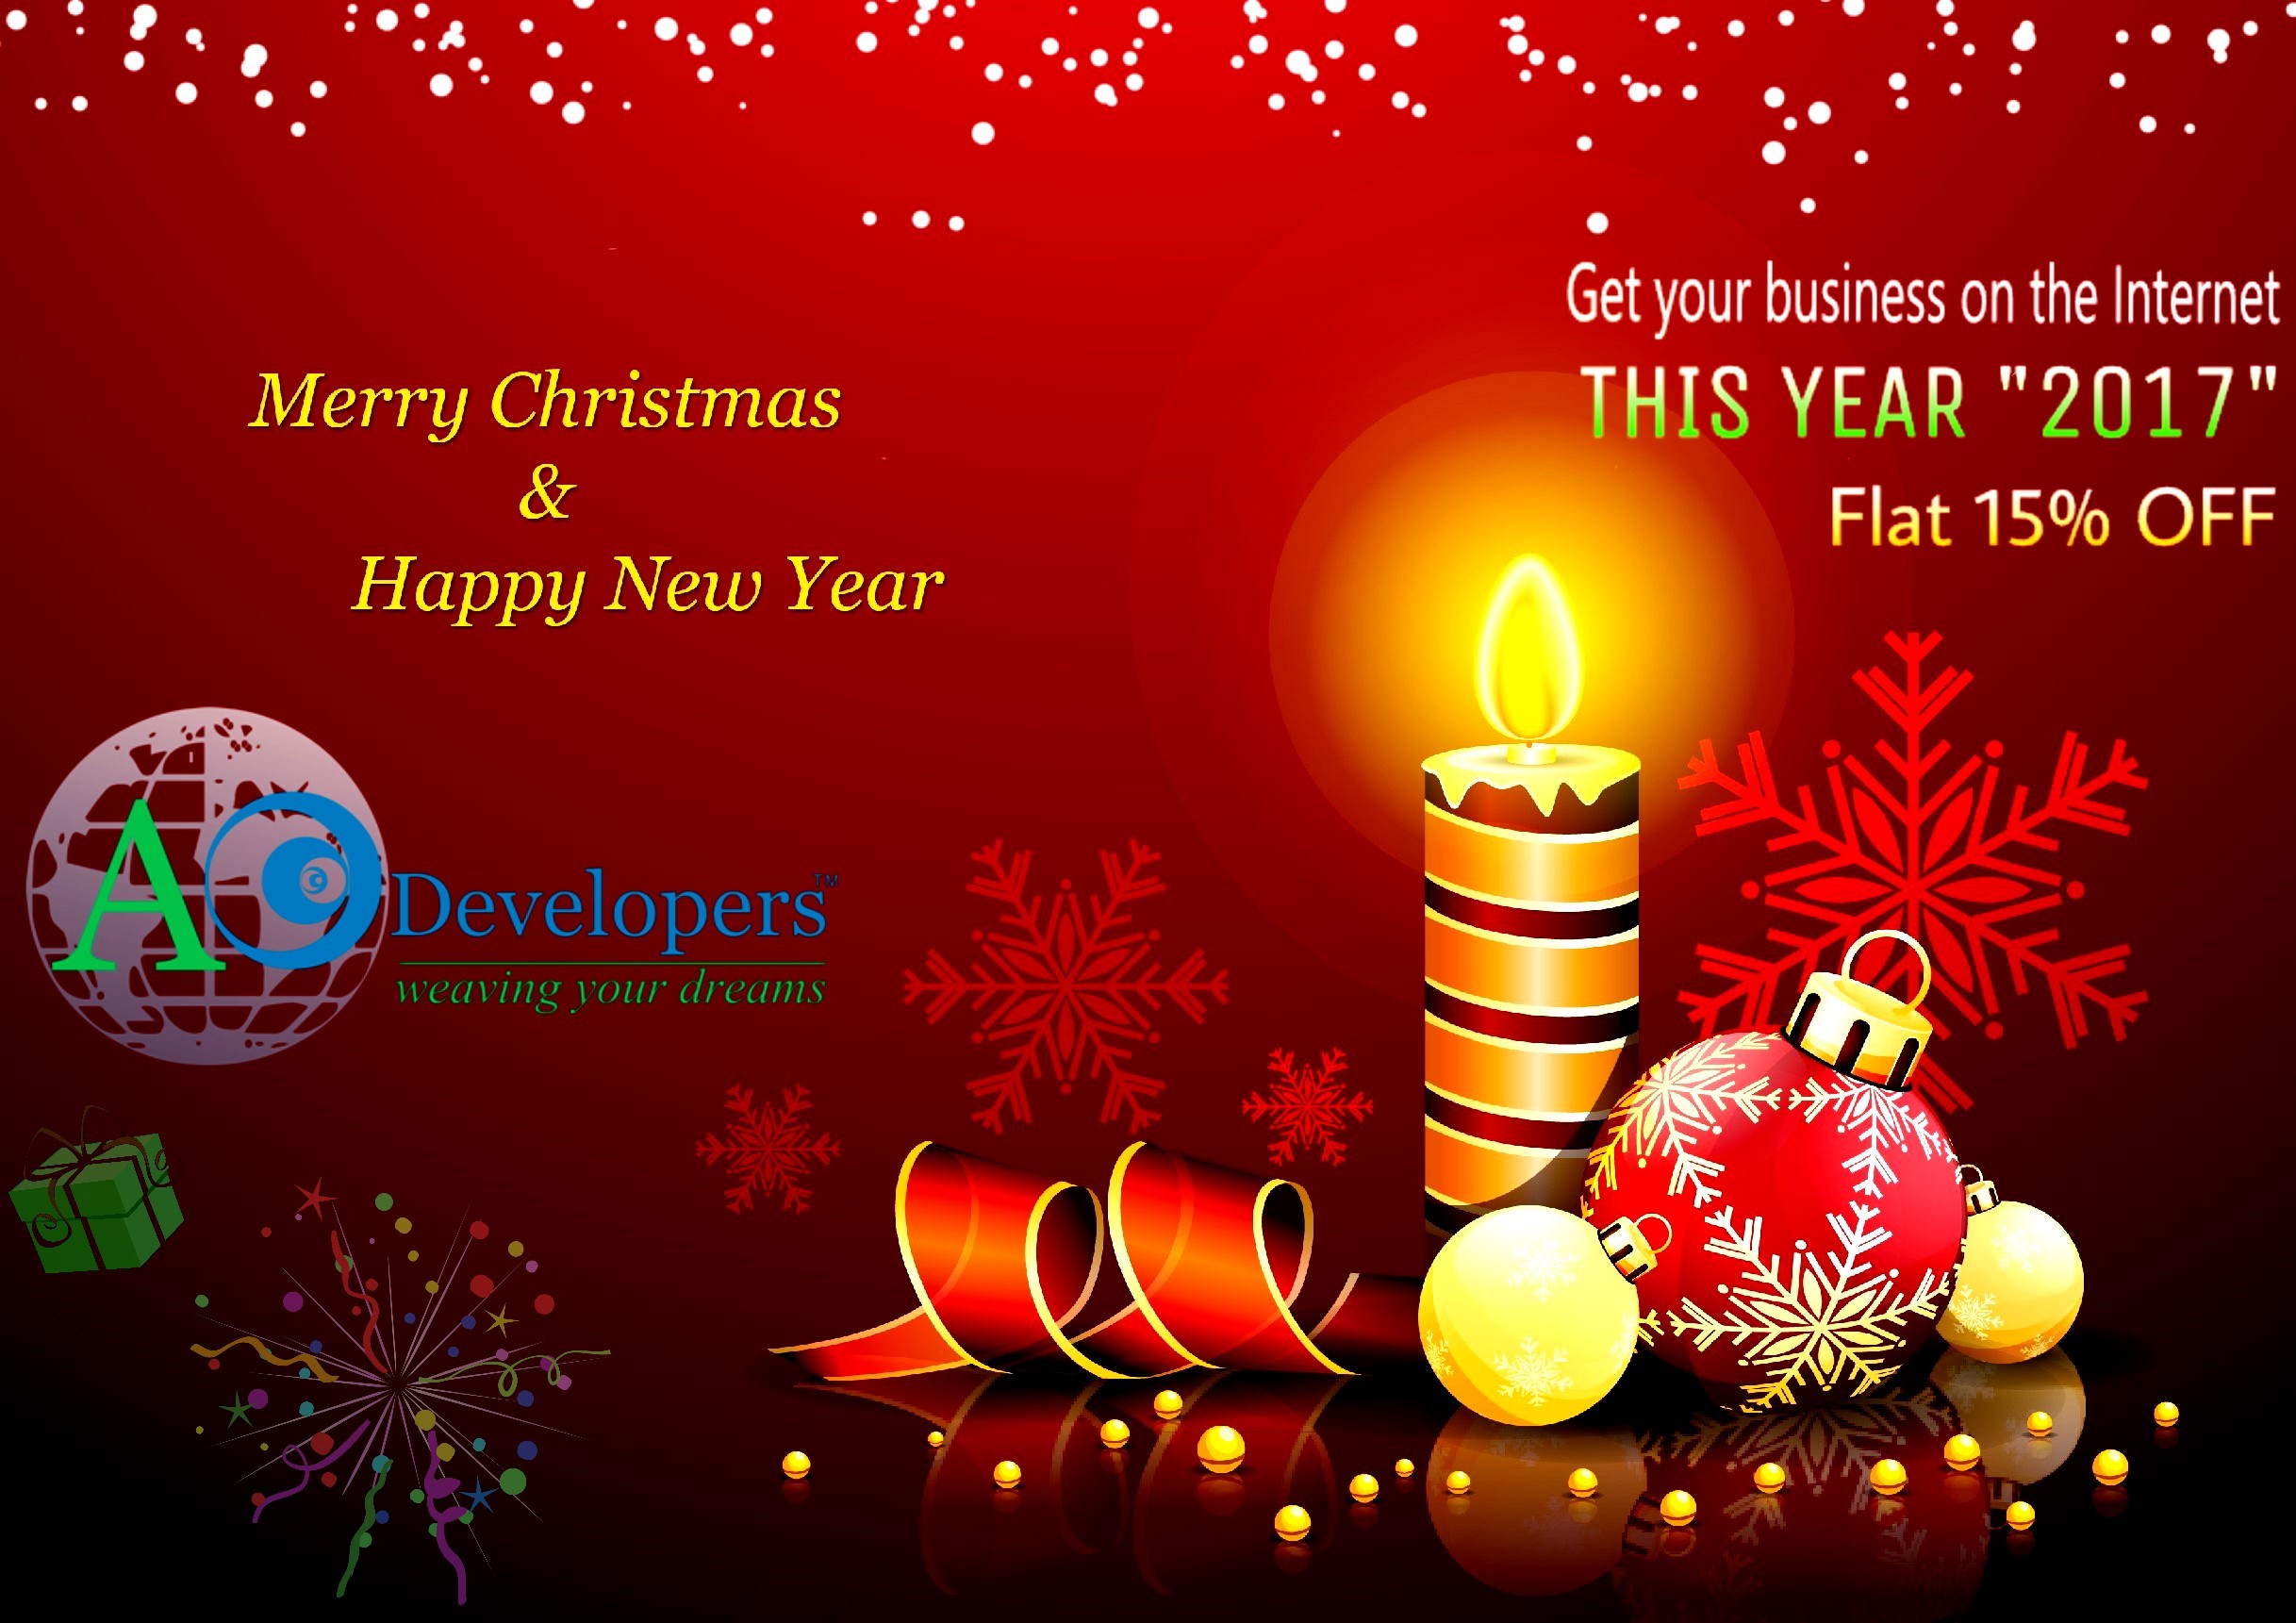 happy-new-year-offer-by-ao-developers